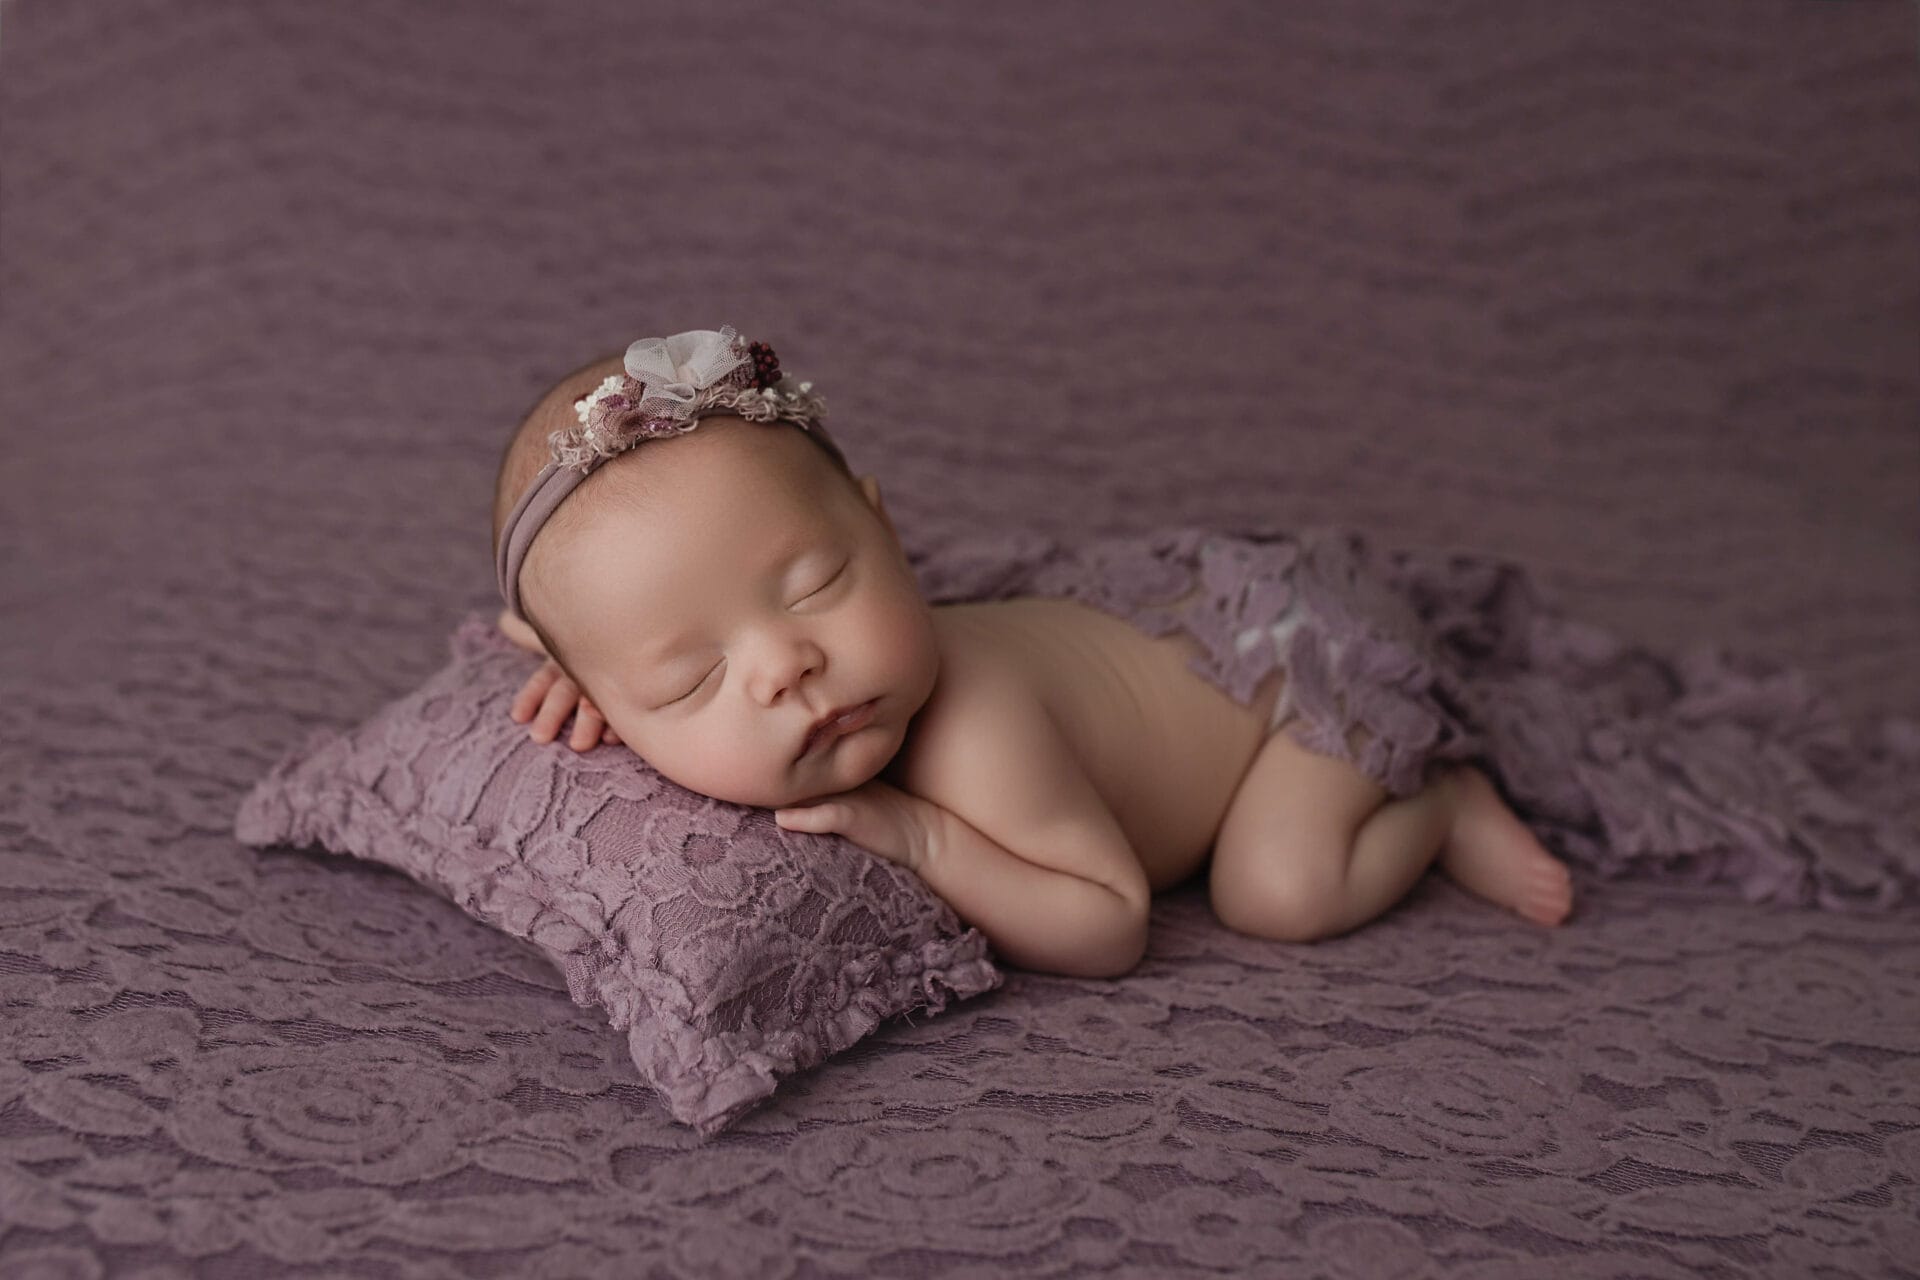 In the studio, a newborn baby girl lying on her tummy on a purple lace backdrop posed on a pillow wearing a purple floral headband.